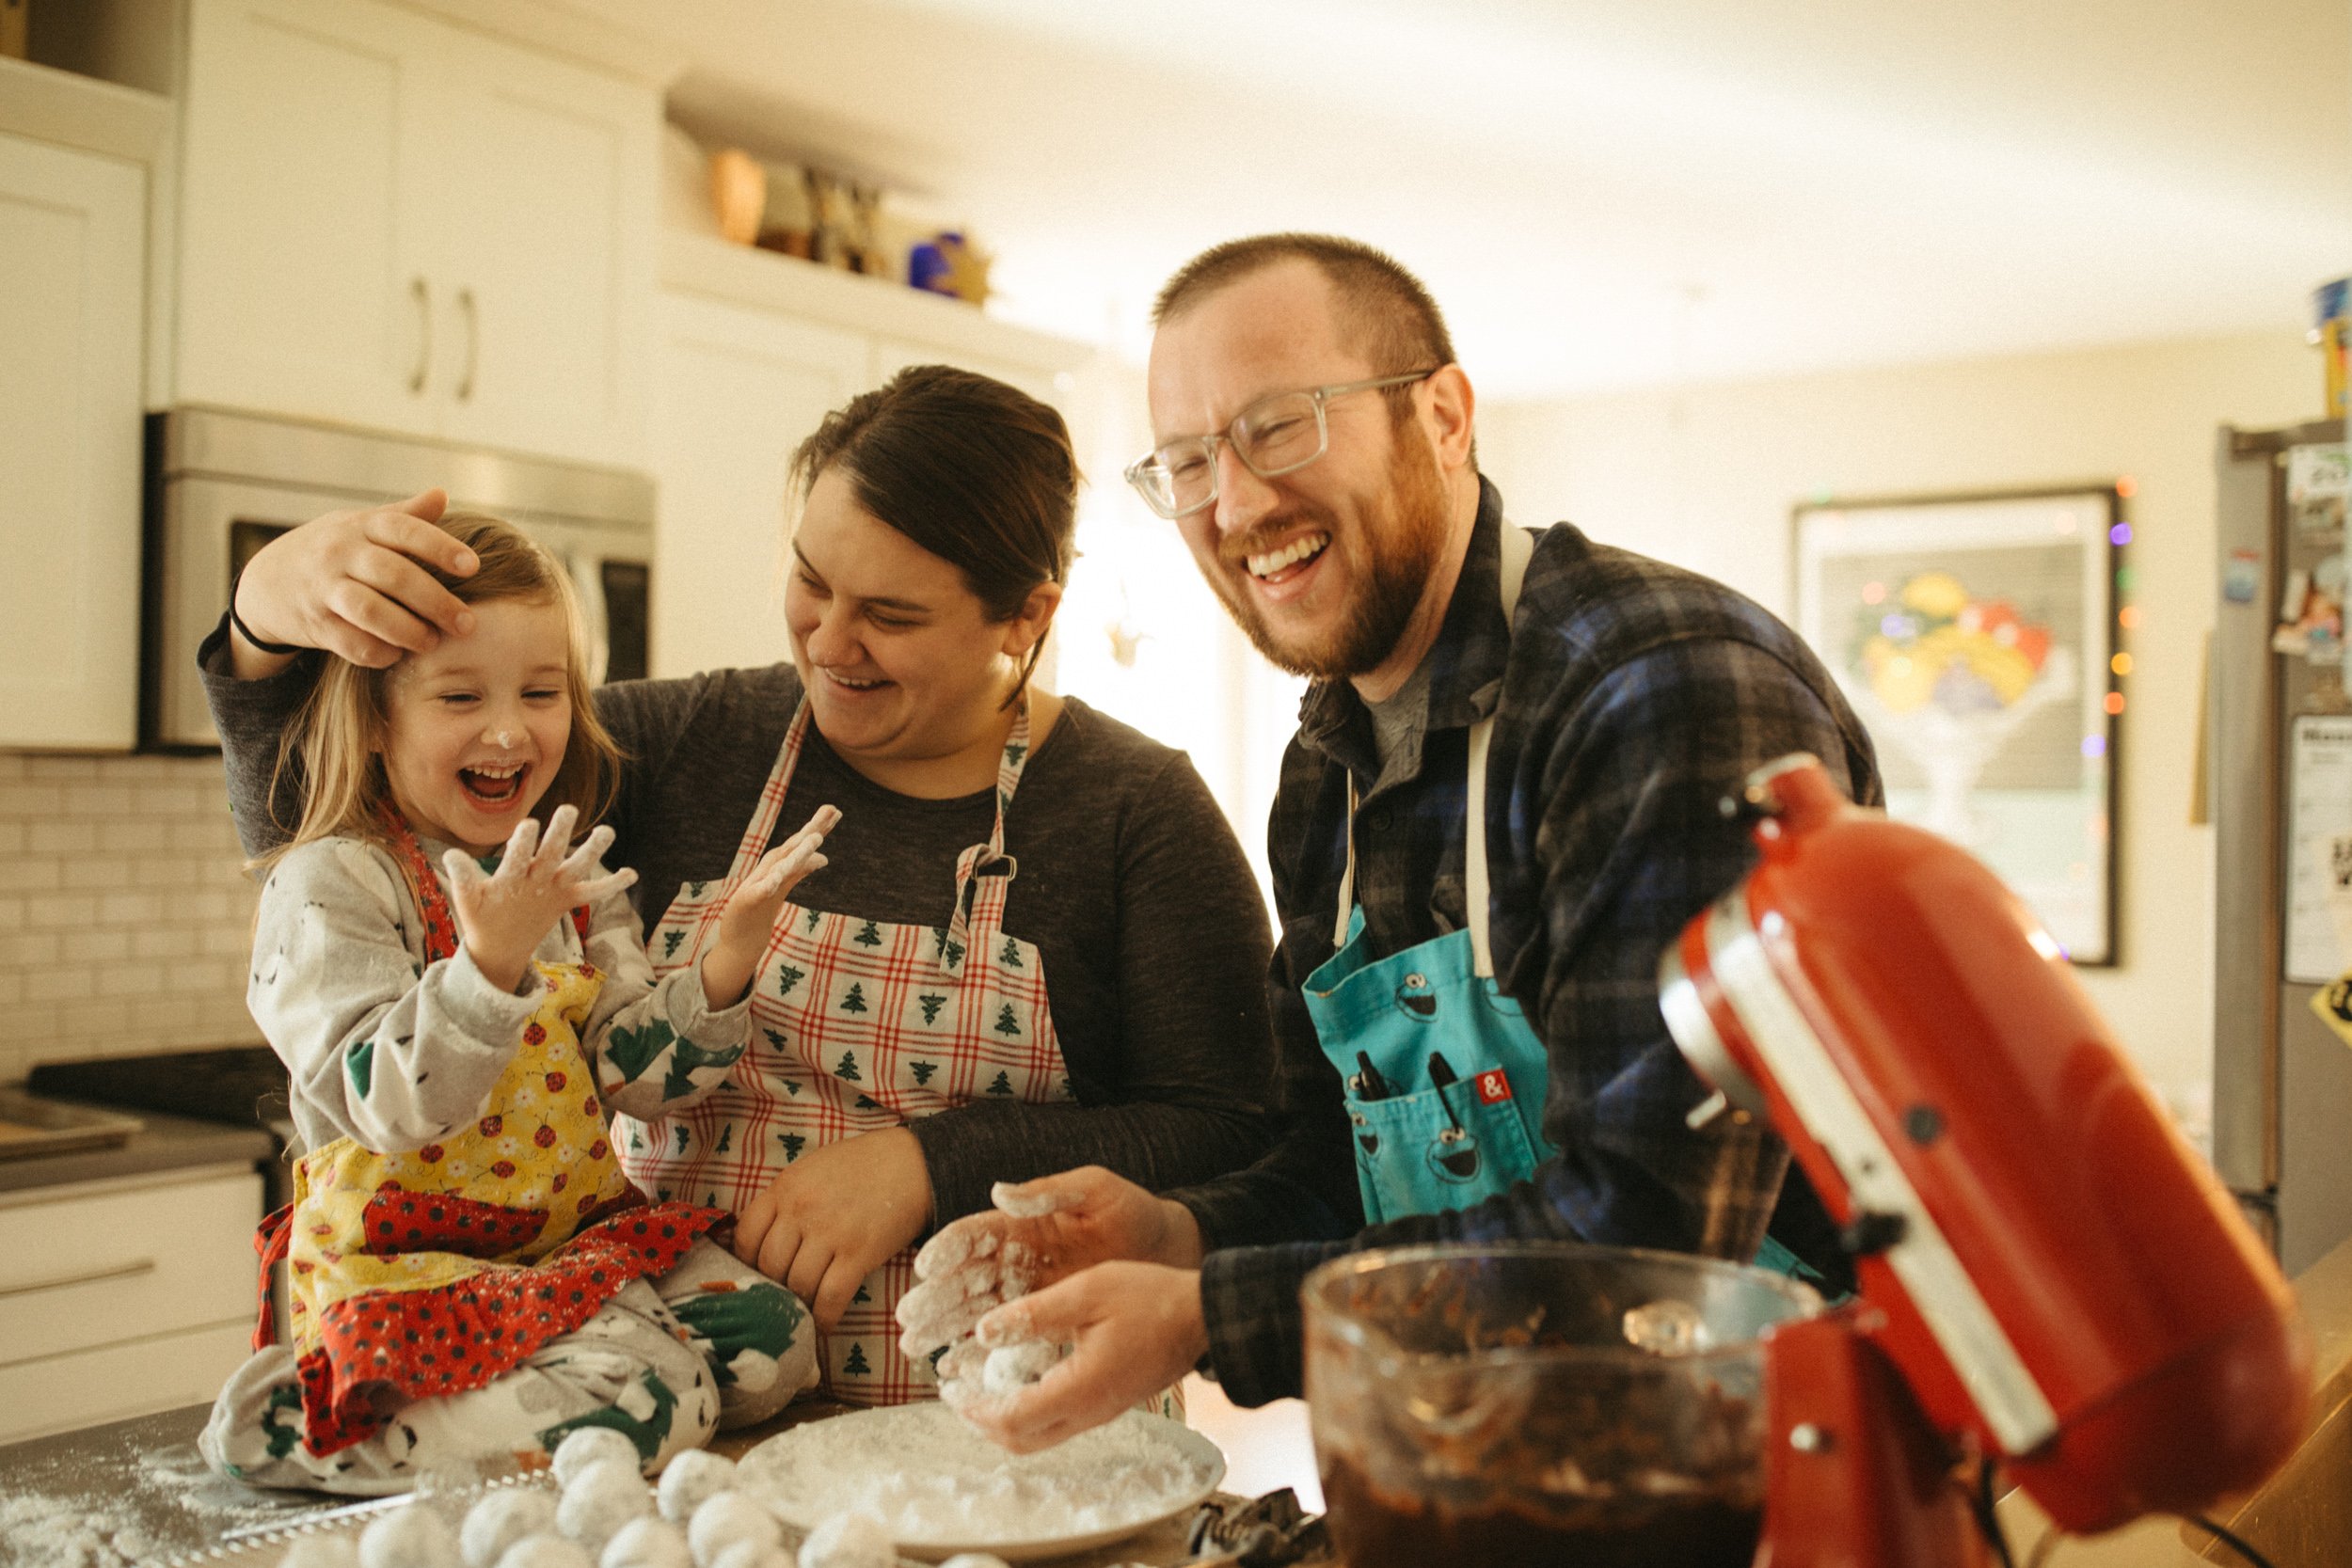 in home session northwest indiana nwi michigan city family documentary film lifestyle photographer baking Christmas cookies -7.jpg